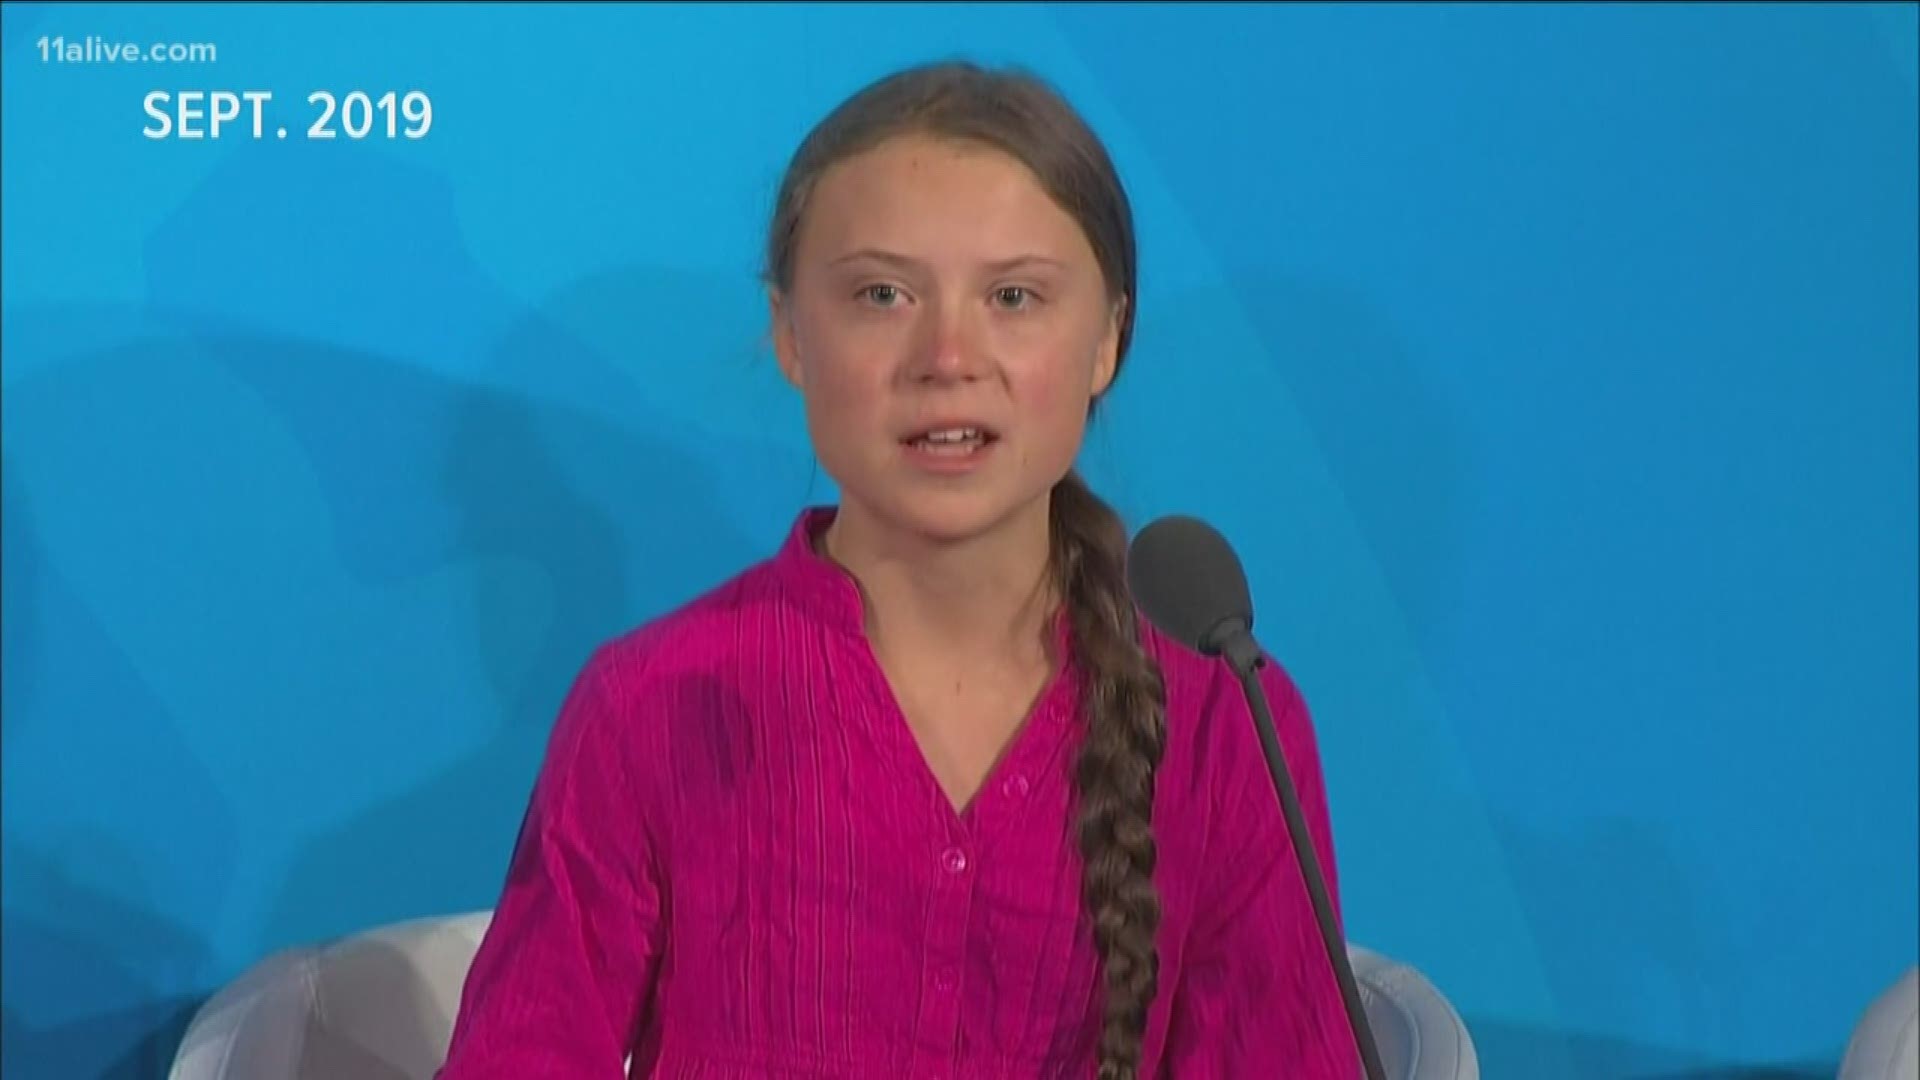 The 16-year-old climate activist is the youngest individual ever to be named TIME's person of the Year.